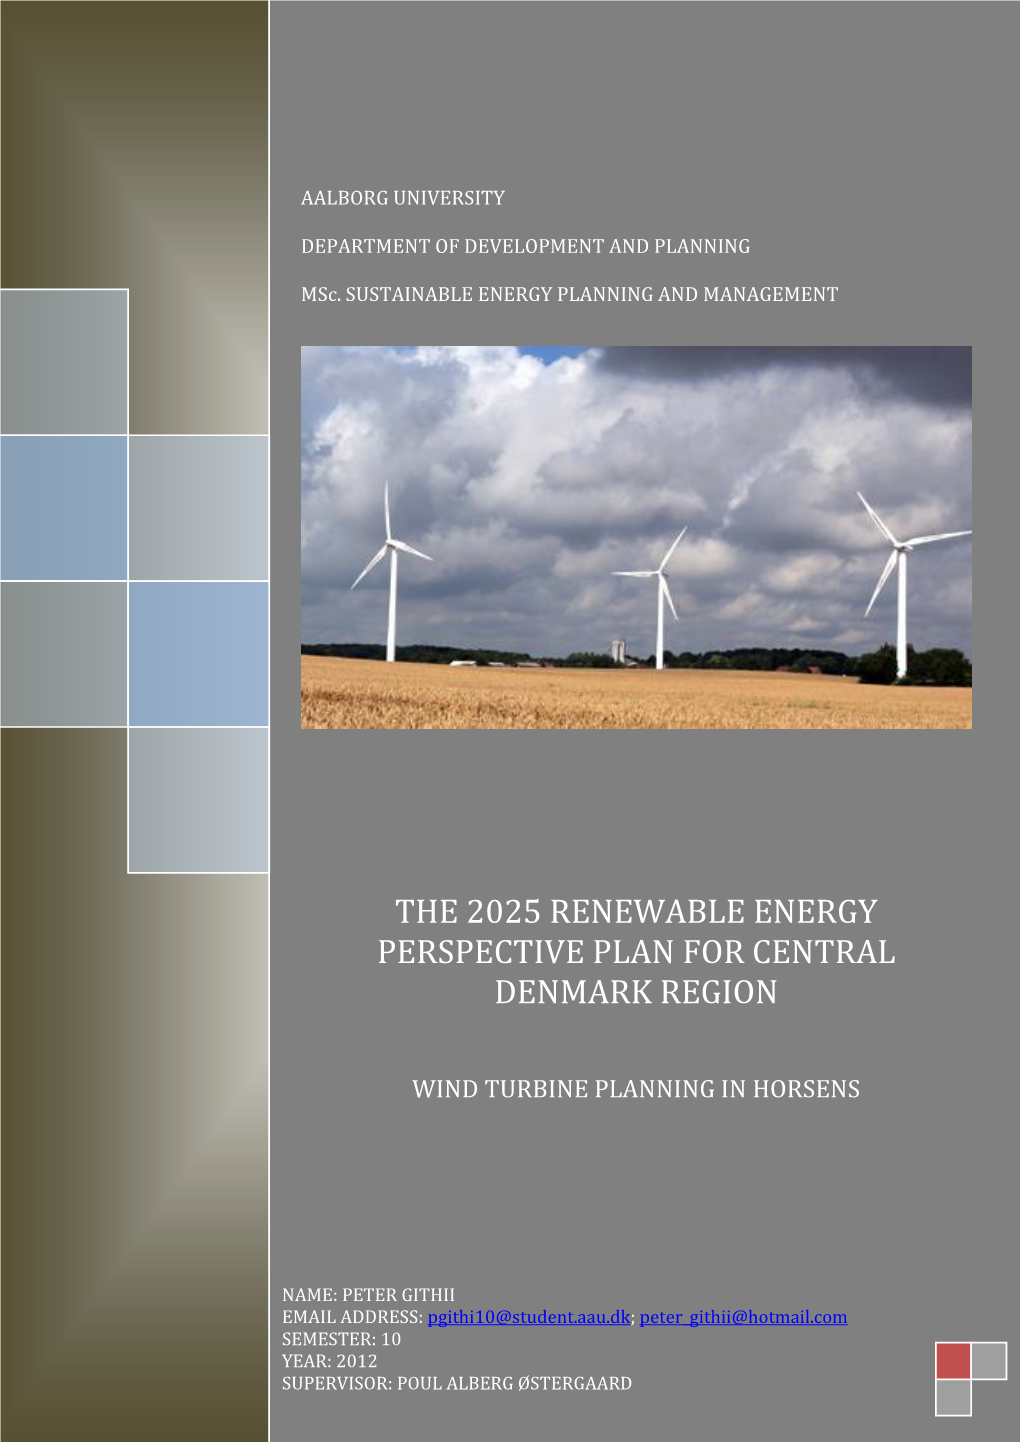 The 2025 Renewable Energy Perspective Plan for Central Denmark Region